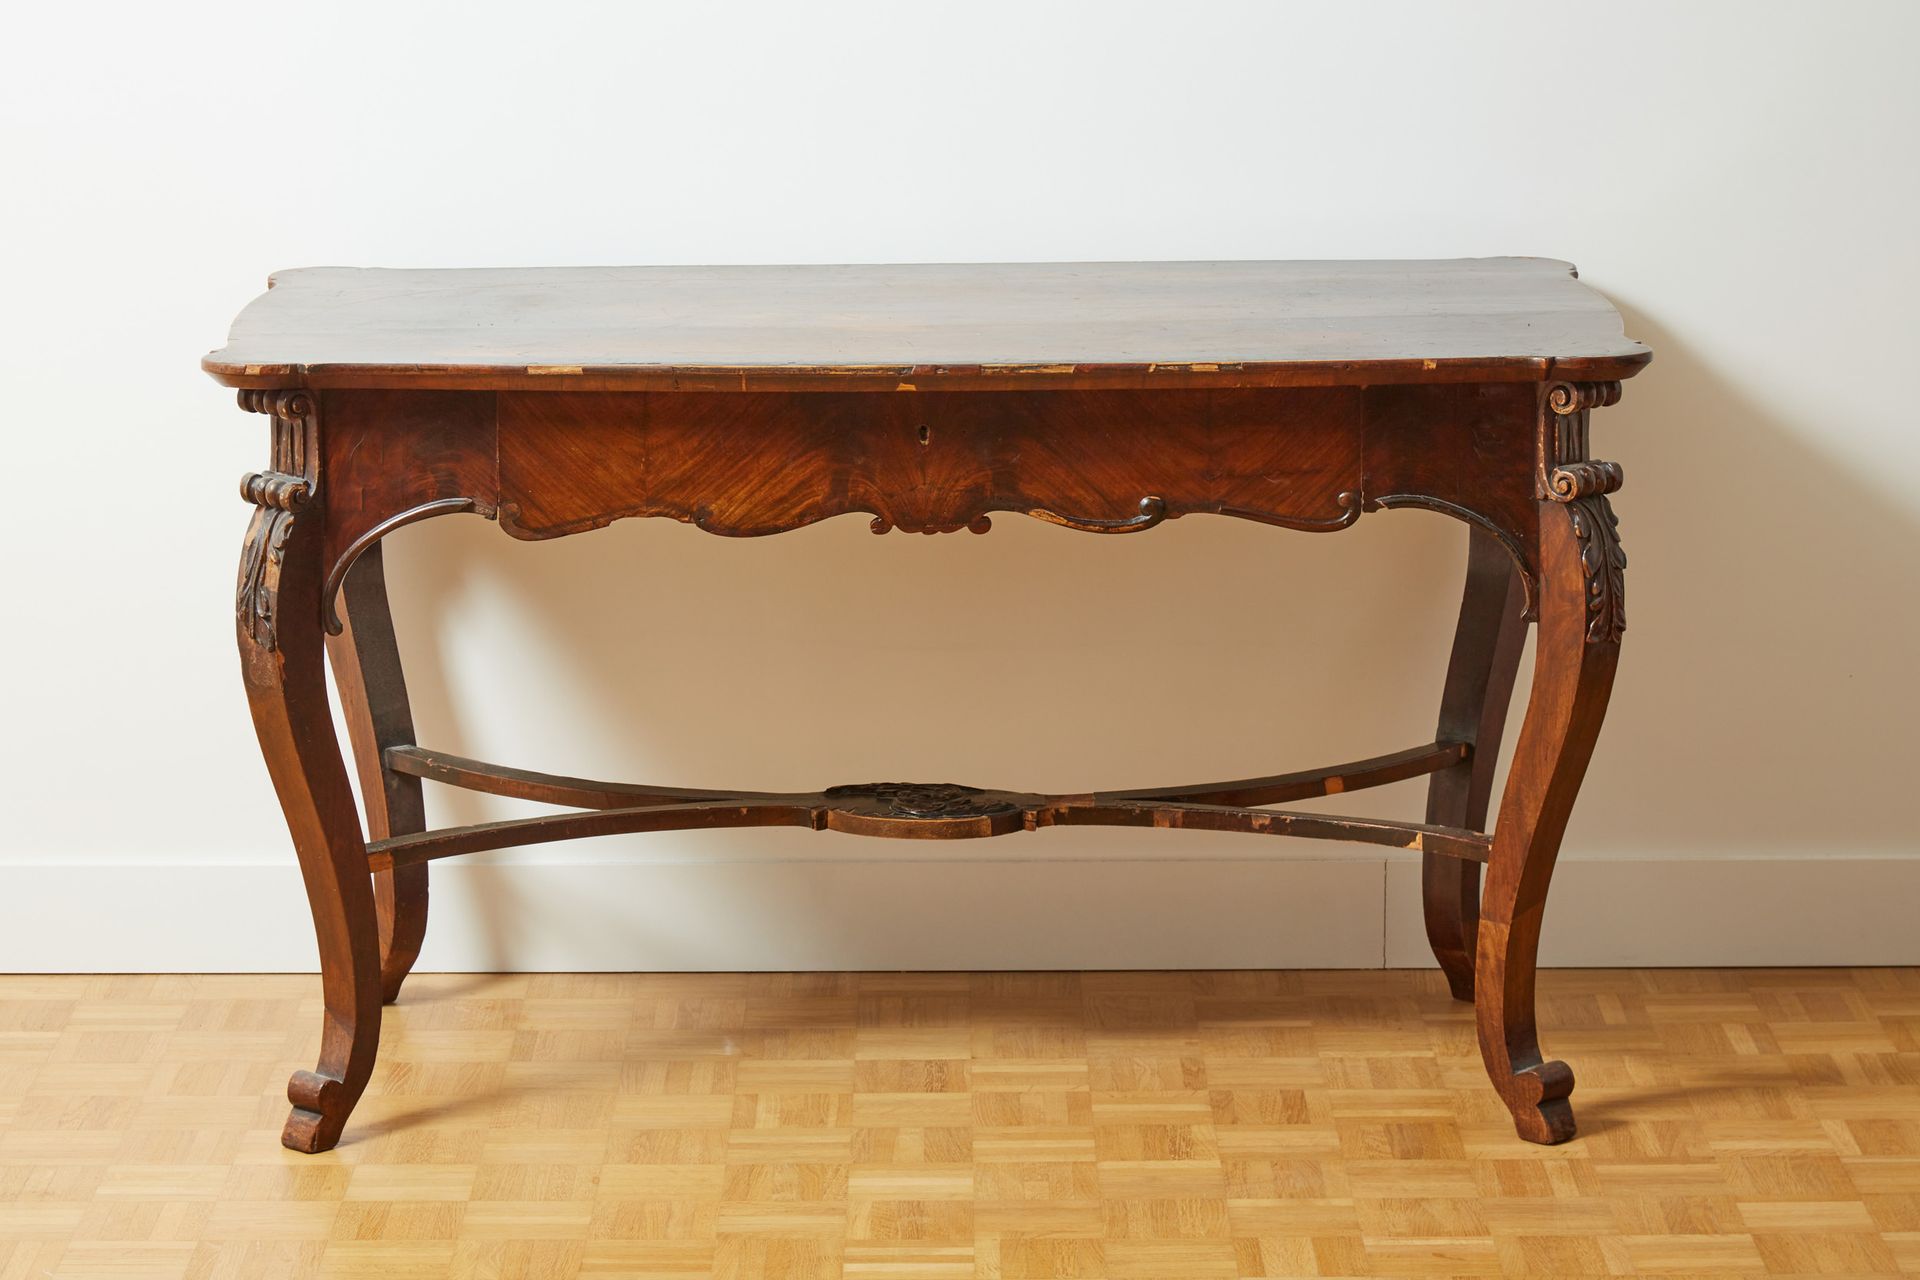 Null Veneer desk with one drawer in the belt, X-shaped braces, Northern Italy

H&hellip;